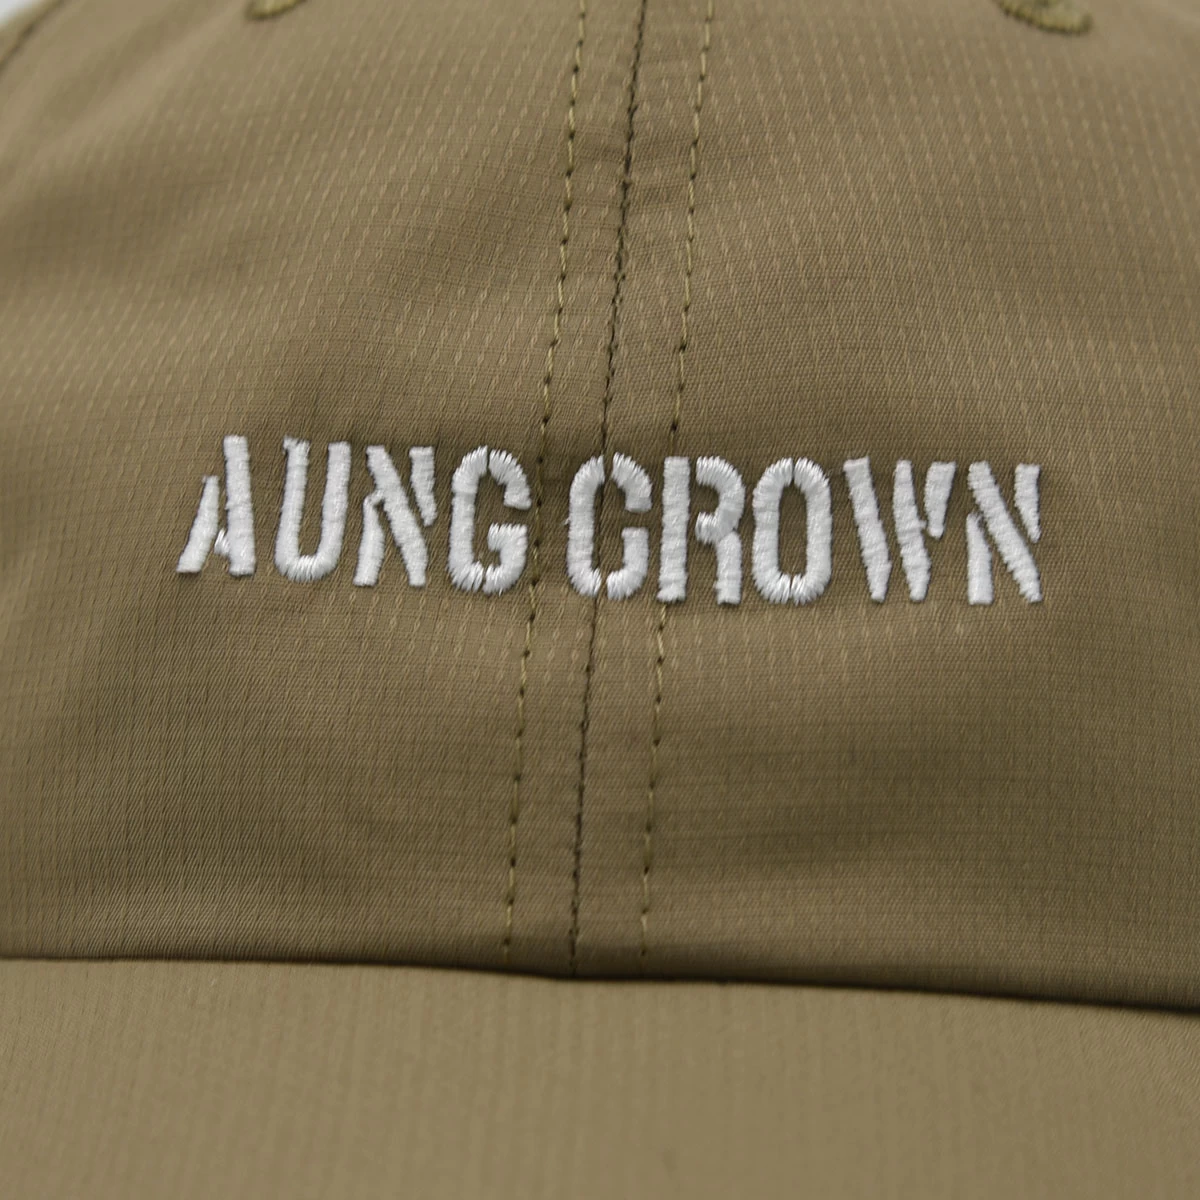 aungcrown letters embroidery logo dad hats, sports baseball caps dad hats, design logo sports baseball caps